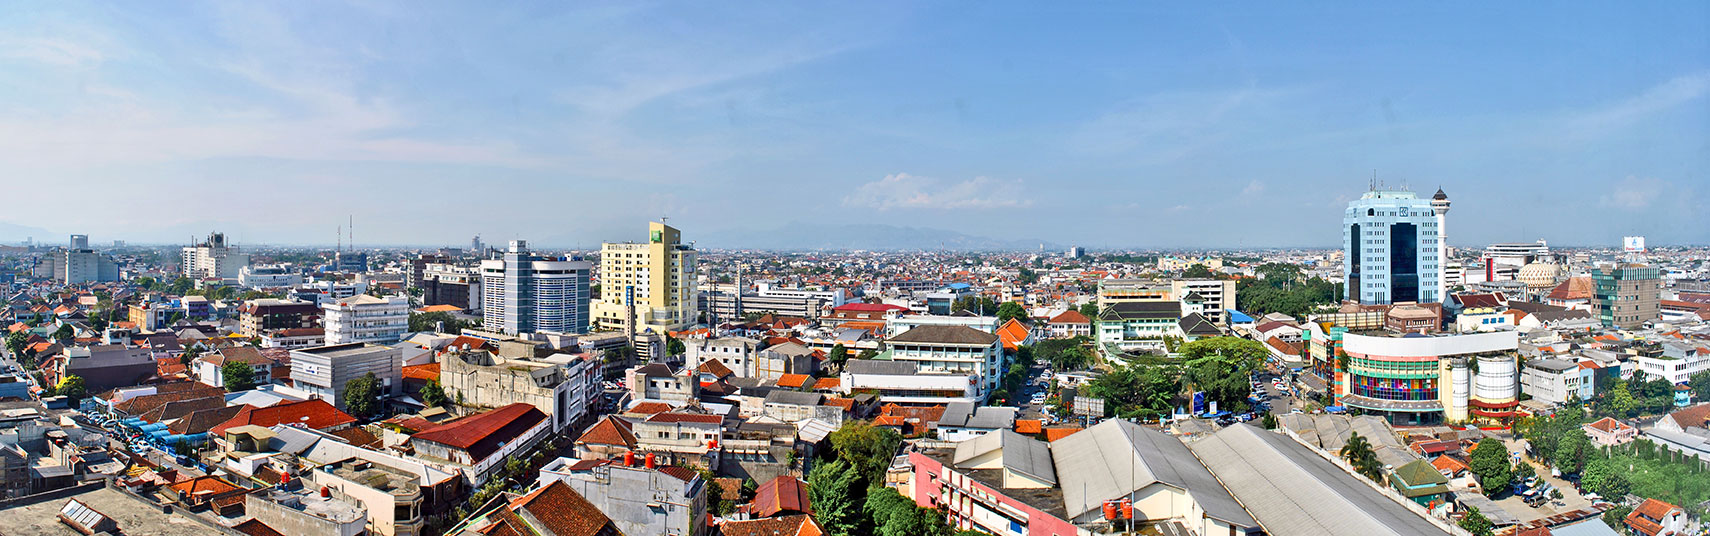 Panoramic view of central and southern Bandung